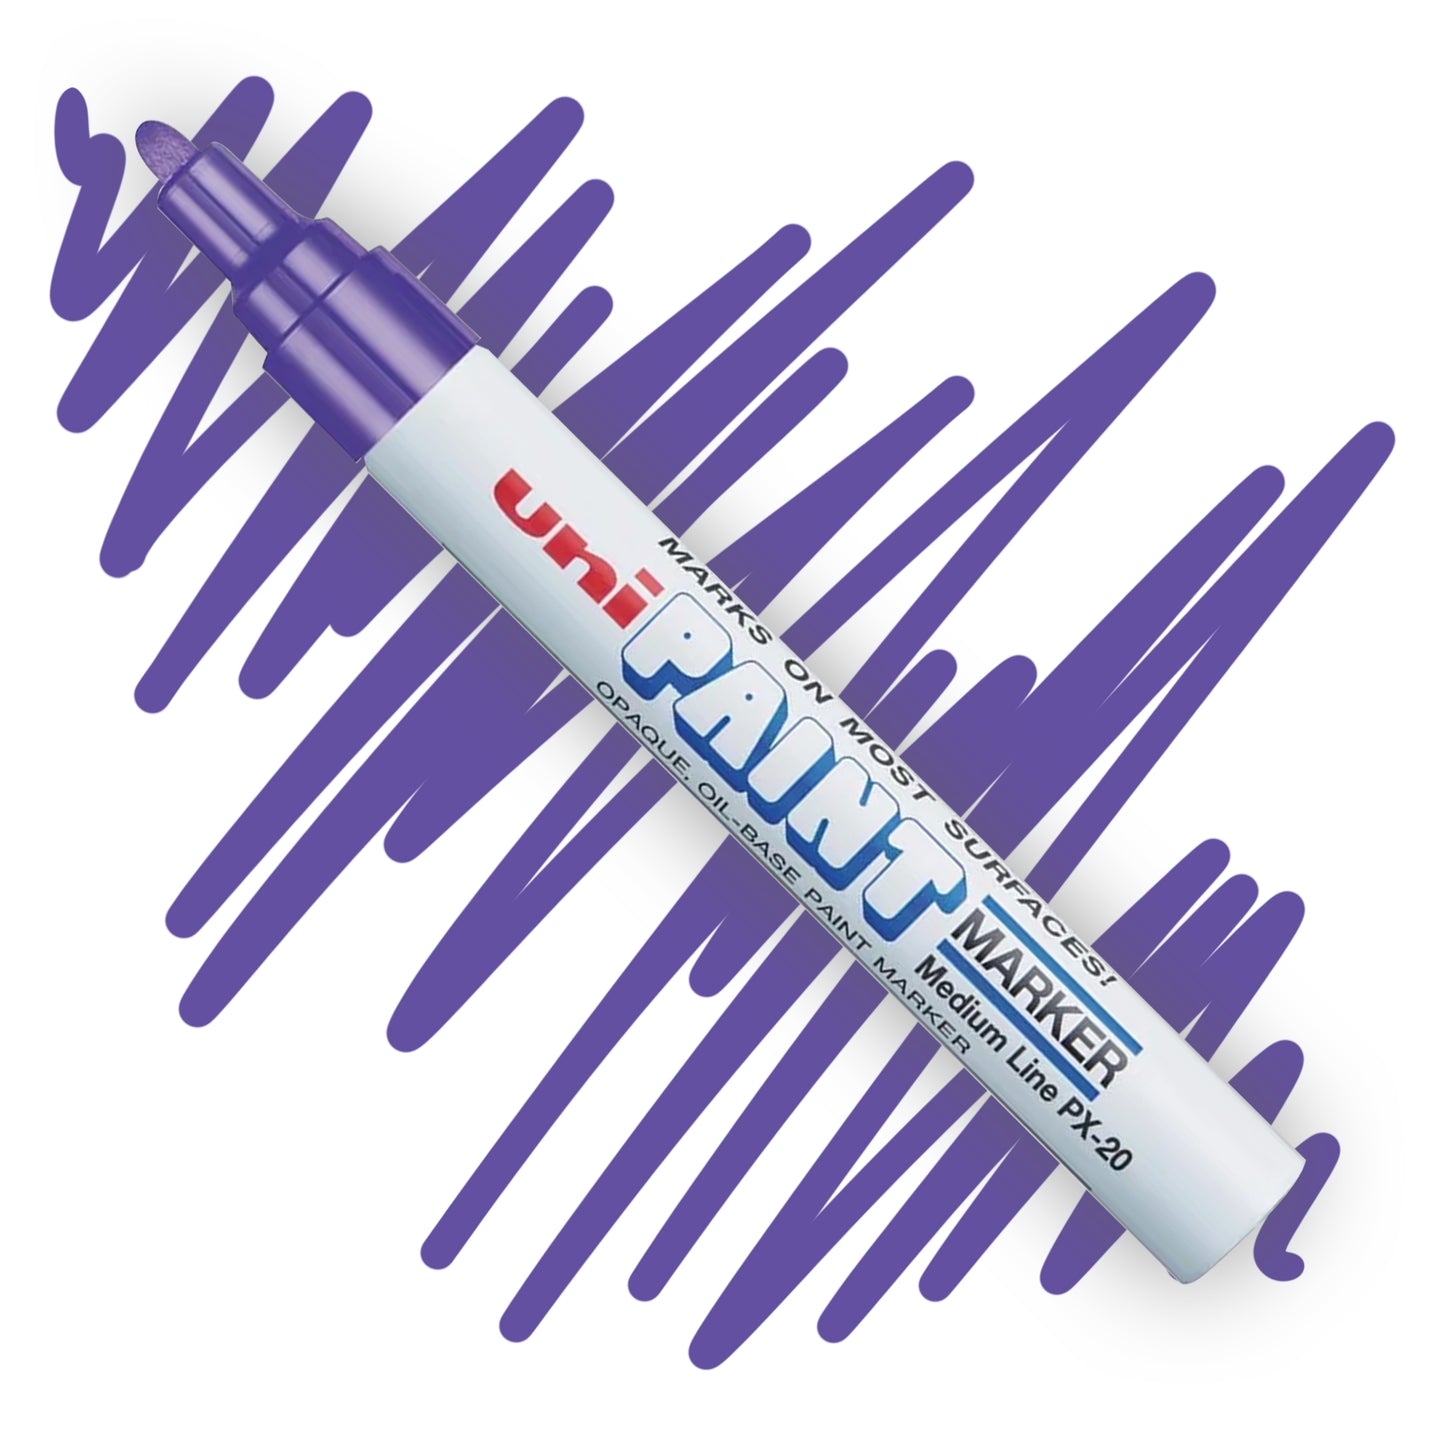 A white marker angled diagonally, the tip of the marker and the nib are colored violet. On the marker body the label reads "Uni PAINT Maker". Behind the marker is a color swatch of a squiggly line in violet.